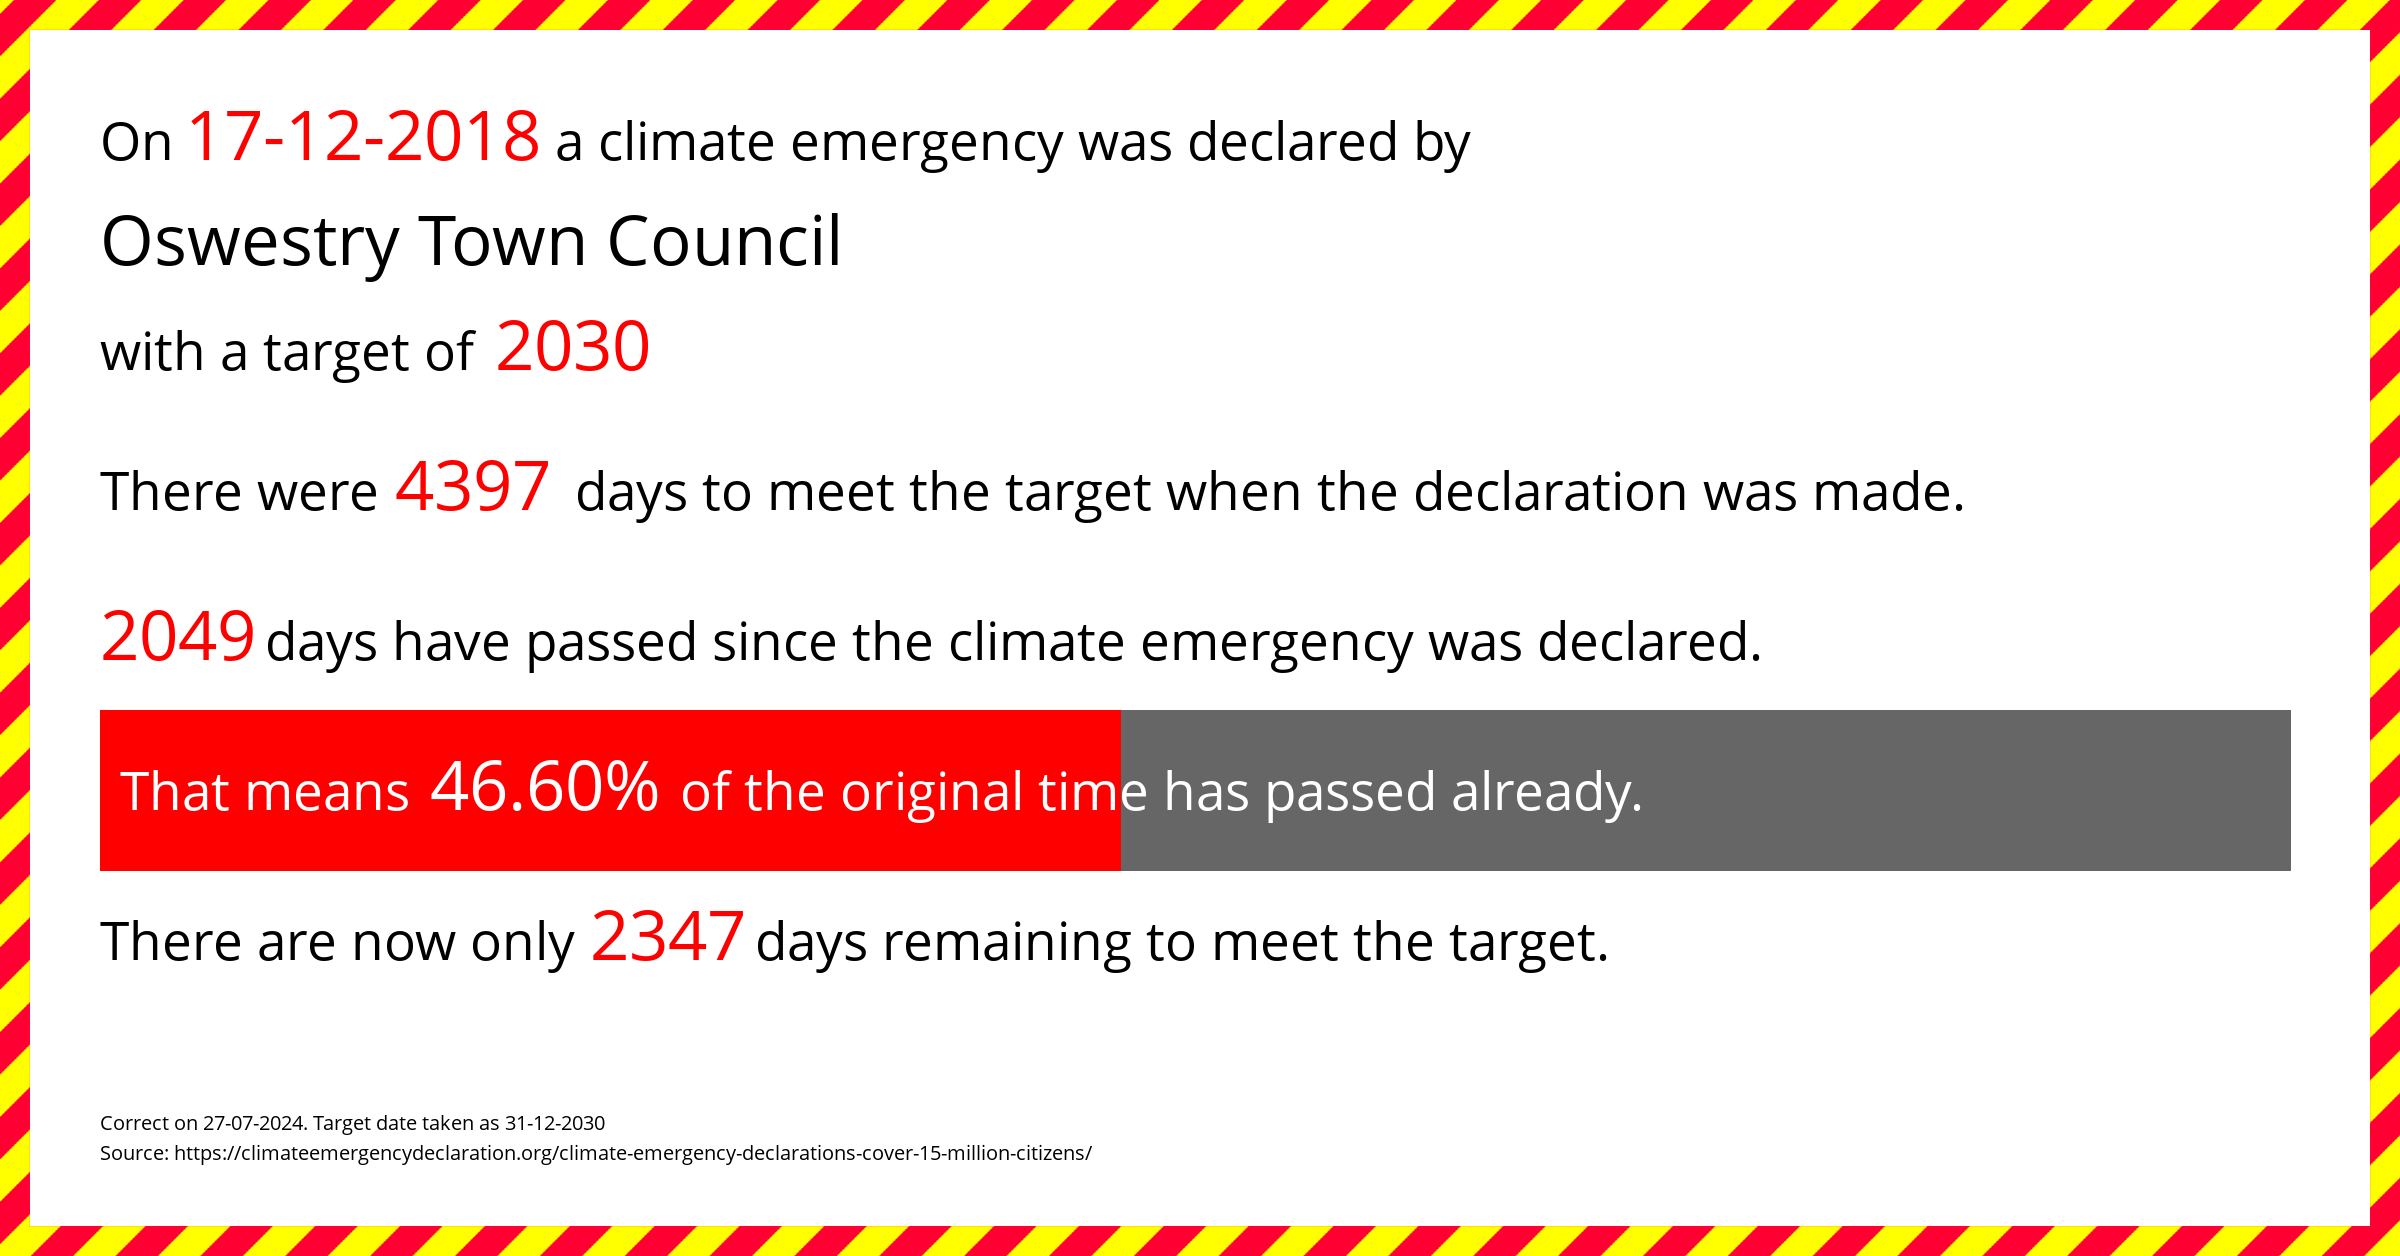 Oswestry Town Council declared a Climate emergency on Monday 17th December 2018, with a target of 2030.